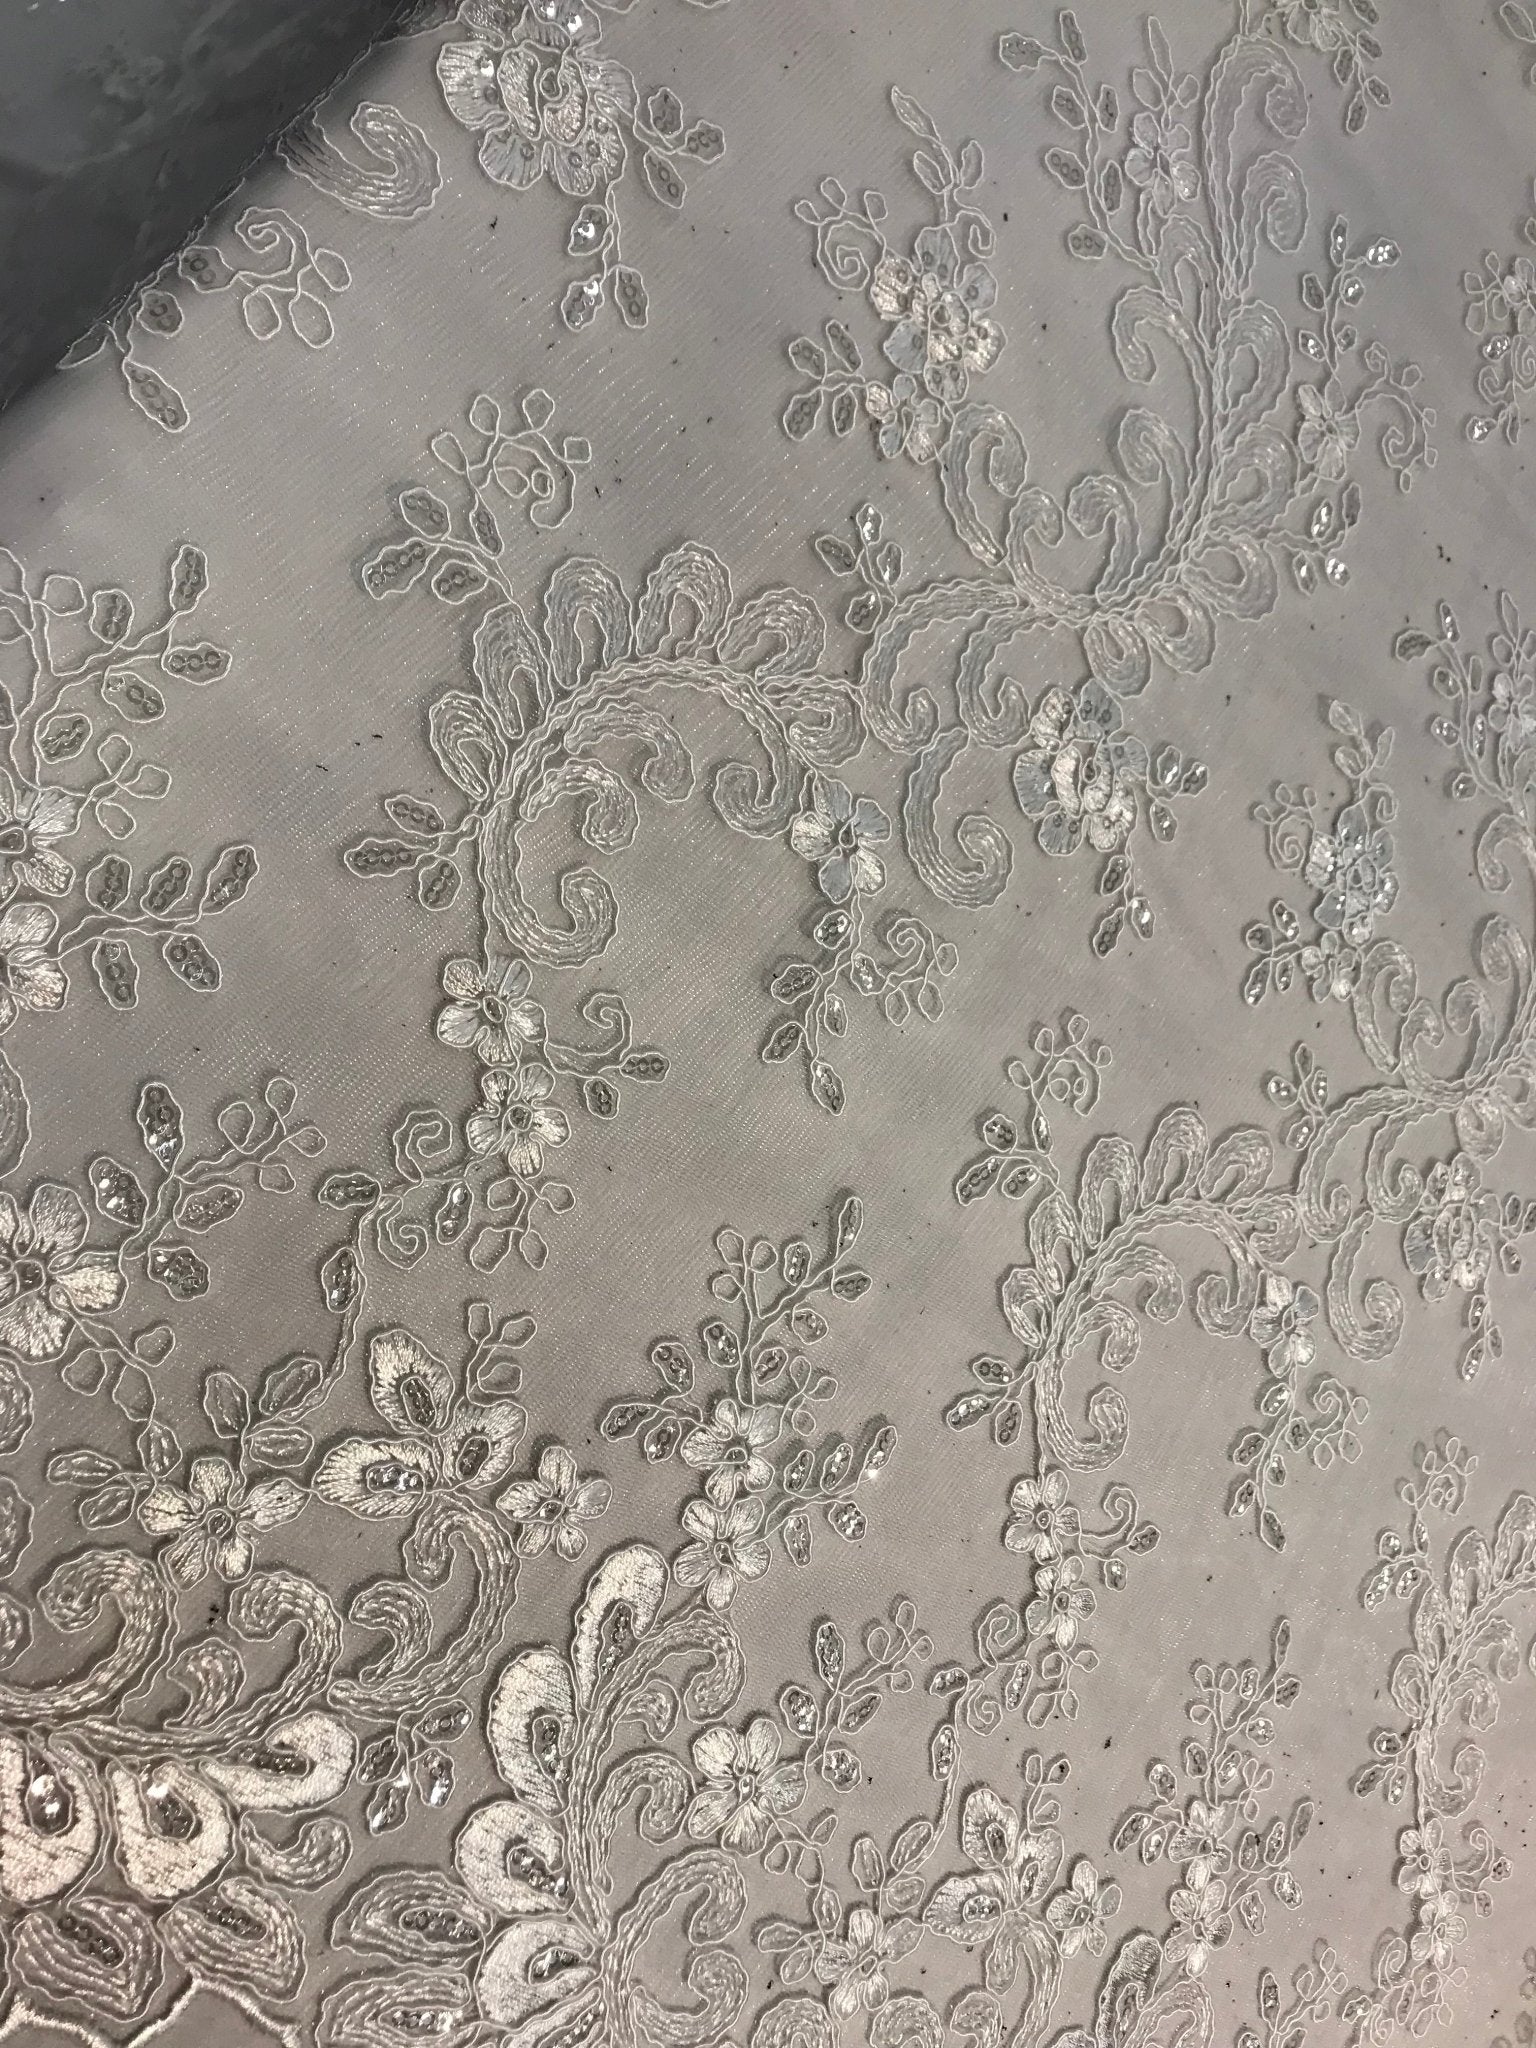 Ivory Design shop prom Bridal Design transparent Fabric Mesh lace Embroidered wedding decoration night gowns tablecloths fashion dressesICE FABRICSICE FABRICSIvory Design shop prom Bridal Design transparent Fabric Mesh lace Embroidered wedding decoration night gowns tablecloths fashion dresses ICE FABRICS